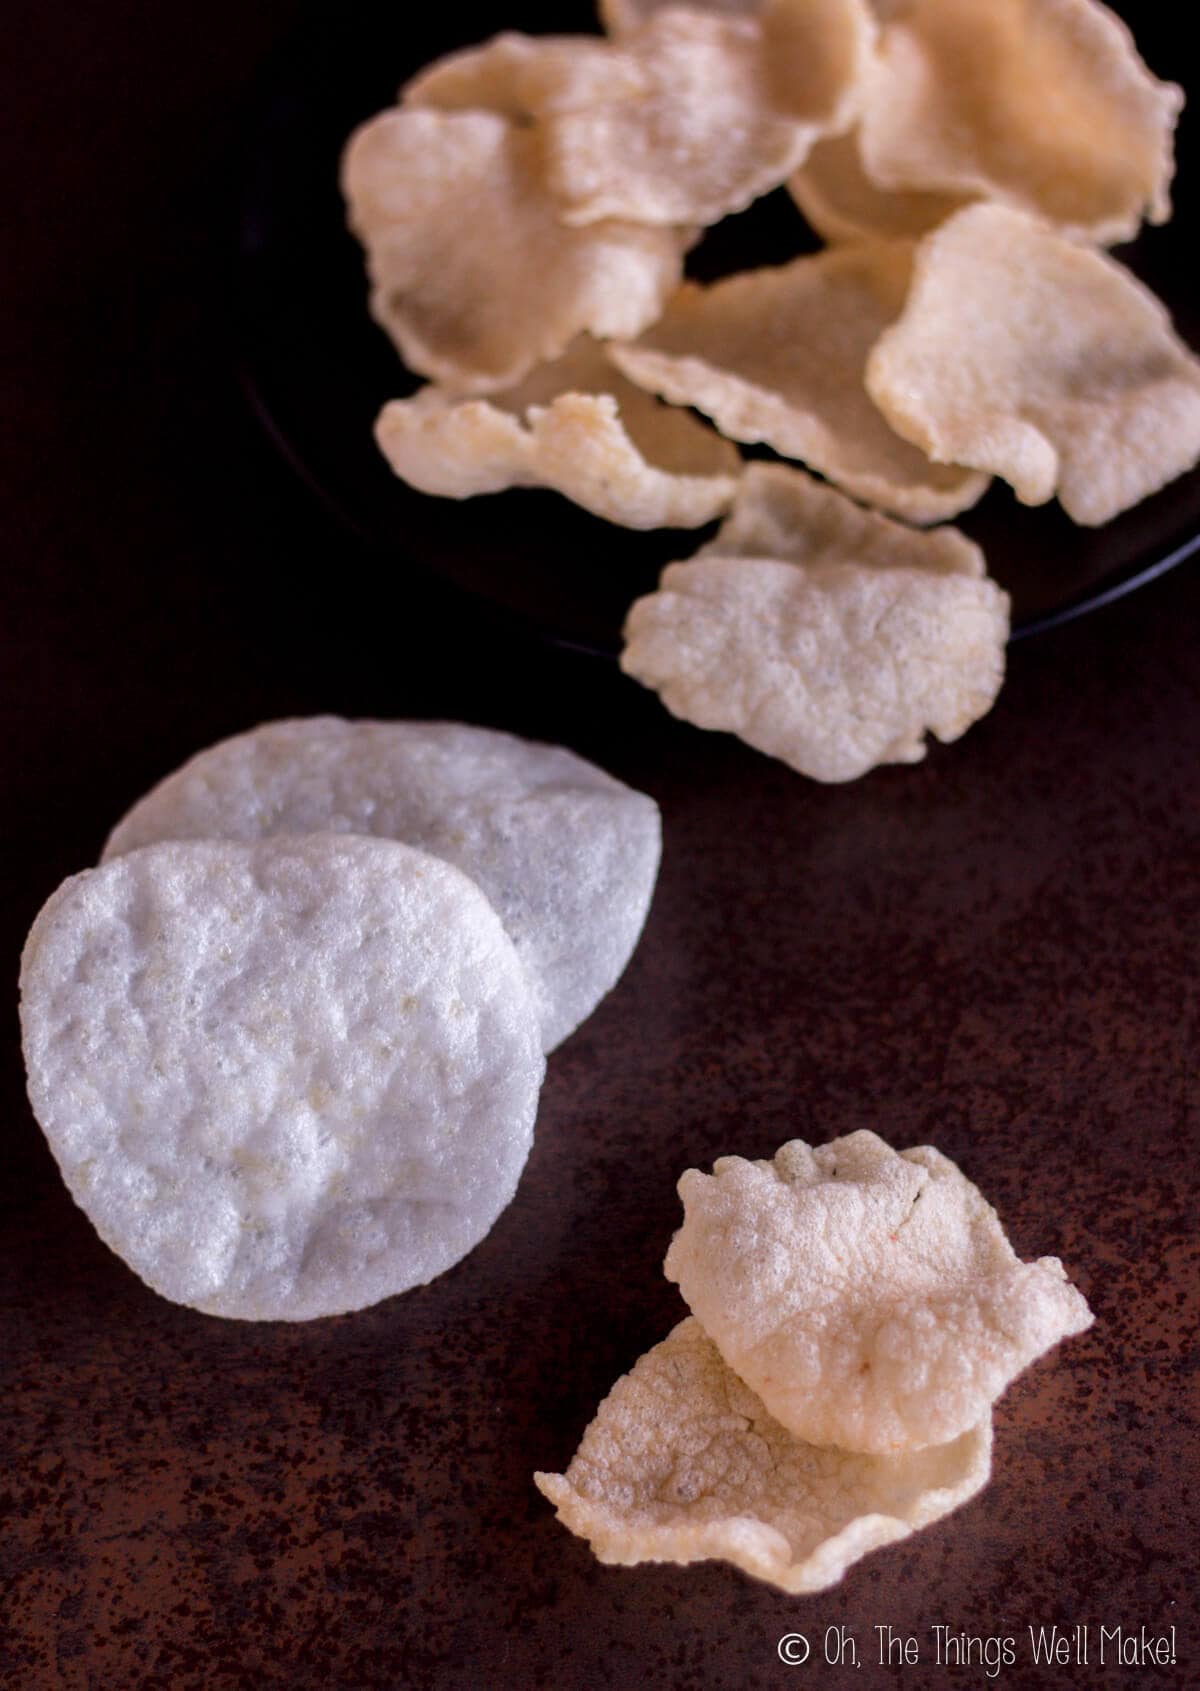 Two homemade prawn crackers in front of 2 store-bought ones. A plate of homemade prawn crackers can be seen in the background.